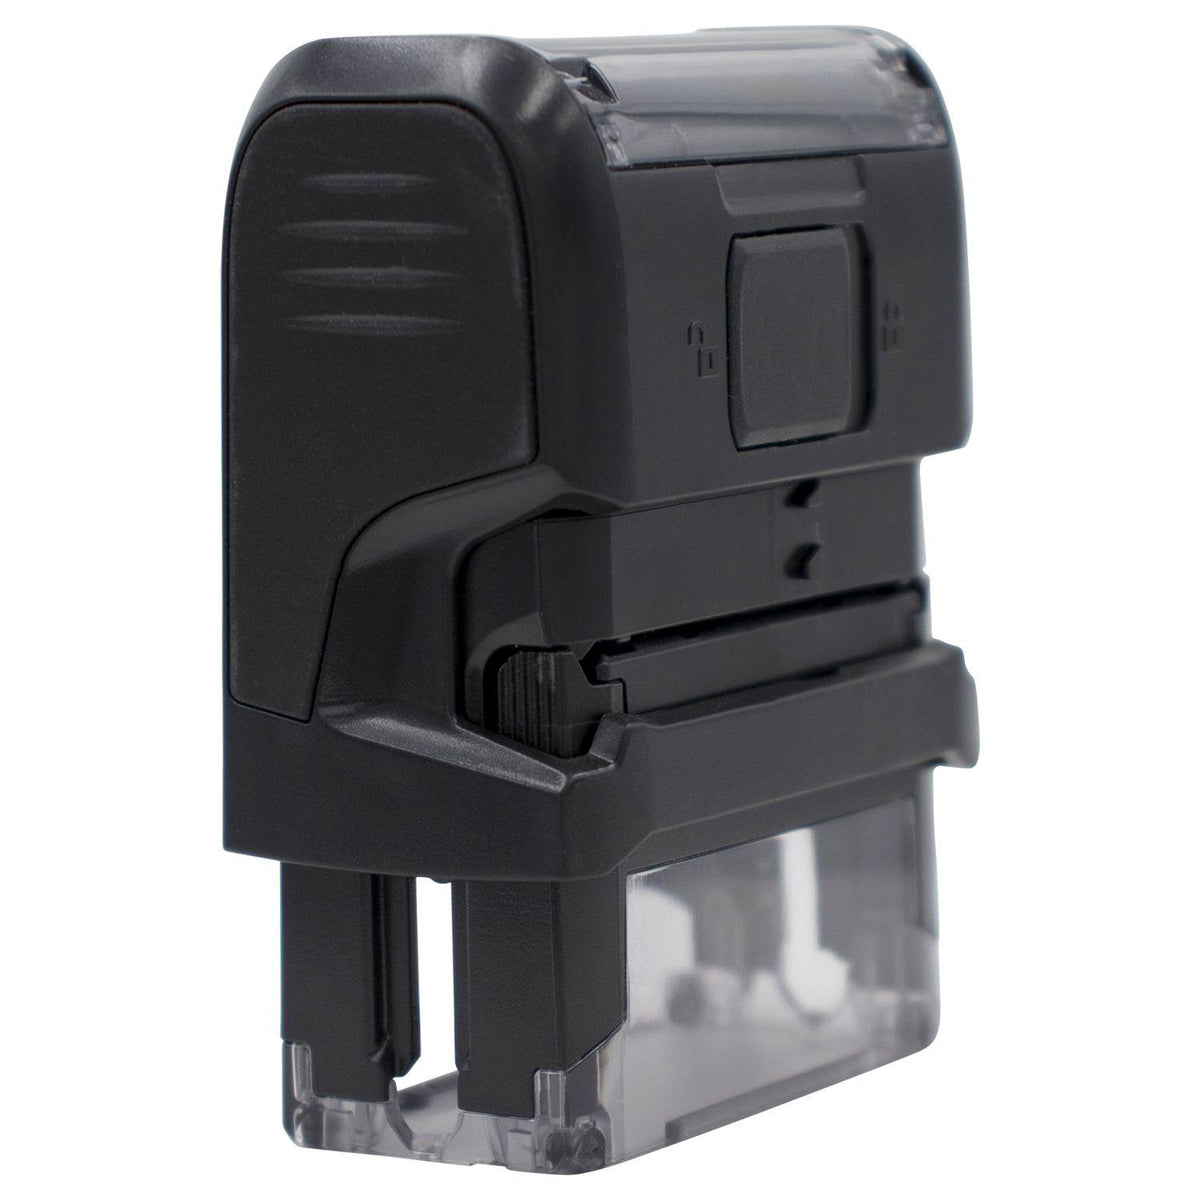 Self Inking Two Line Faxed Stamp - Engineer Seal Stamps - Brand_Trodat, Impression Size_Small, Stamp Type_Self-Inking Stamp, Type of Use_Office